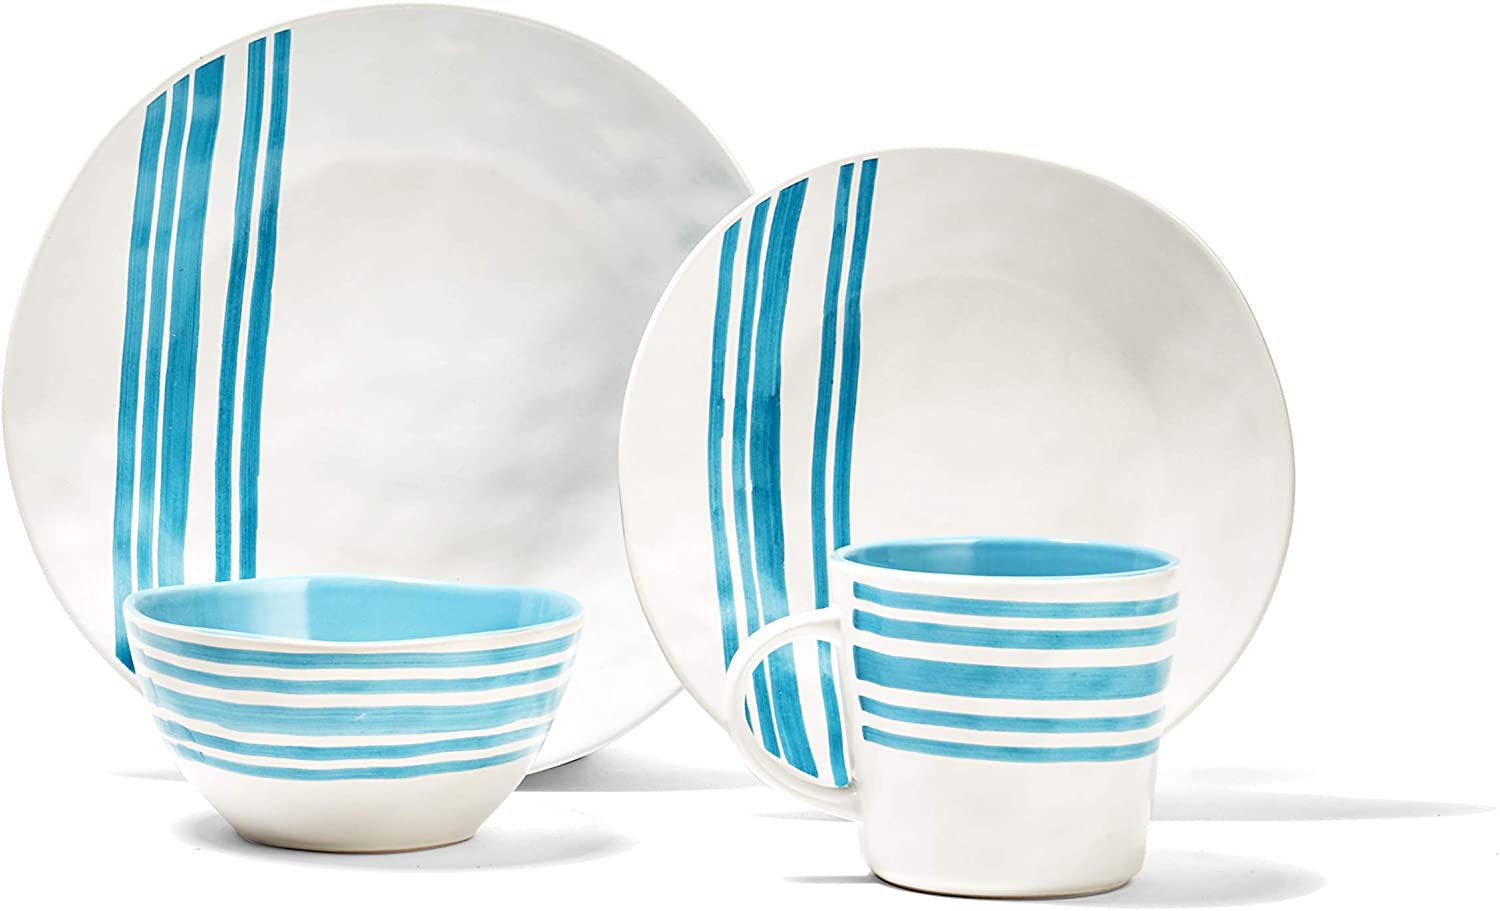 16-Piece American Atelier Stoneware Party Collection Bistro Dinnerware Set (Teal) $30 + Free Shipping w/ Prime